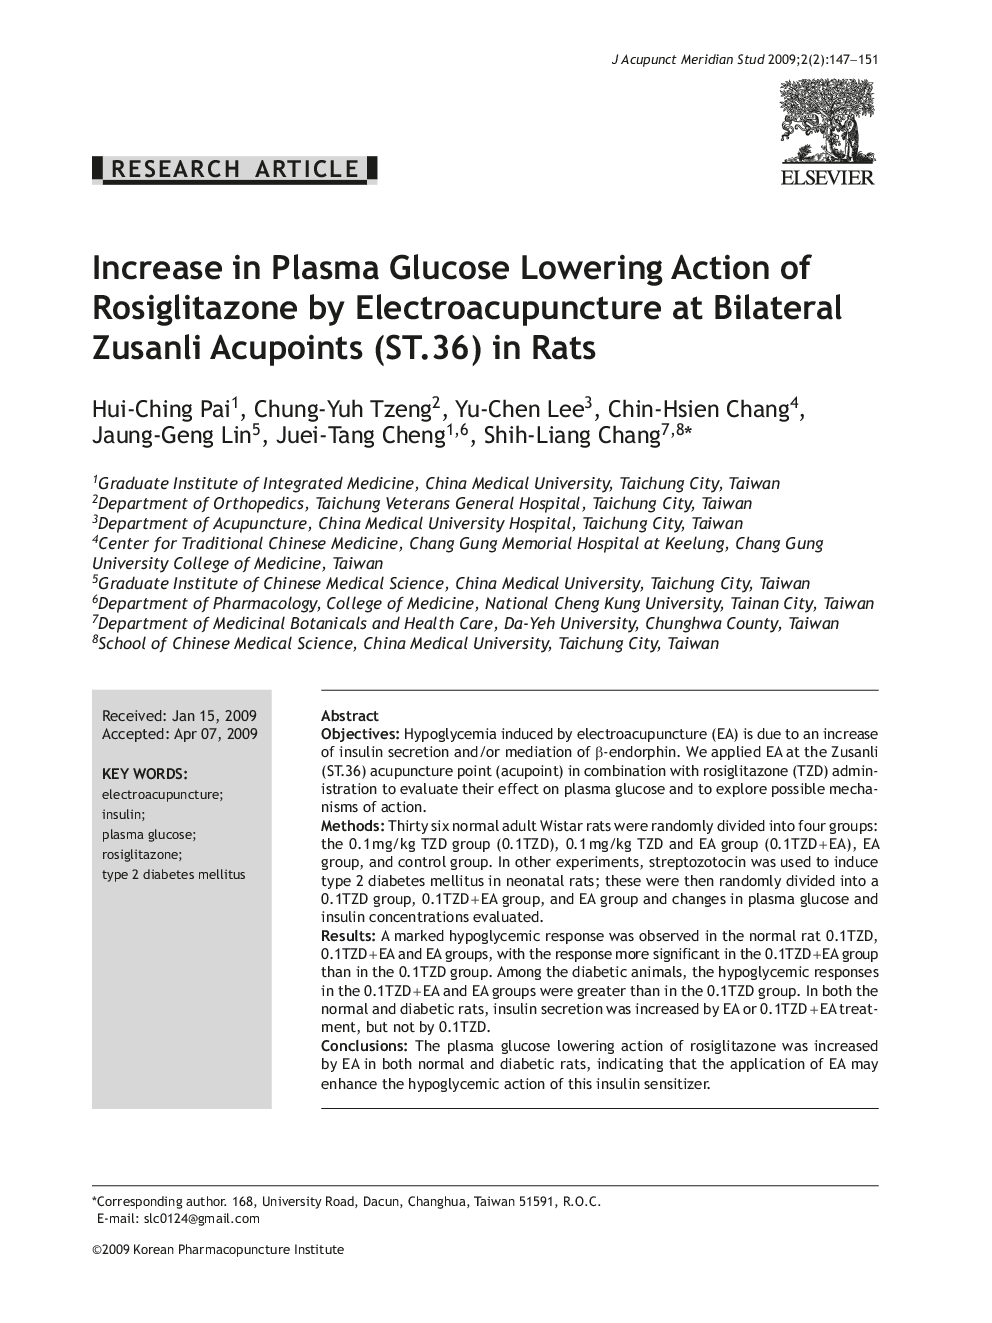 Increase in Plasma Glucose Lowering Action of Rosiglitazone by Electroacupuncture at Bilateral Zusanli Acupoints (ST.36) in Rats